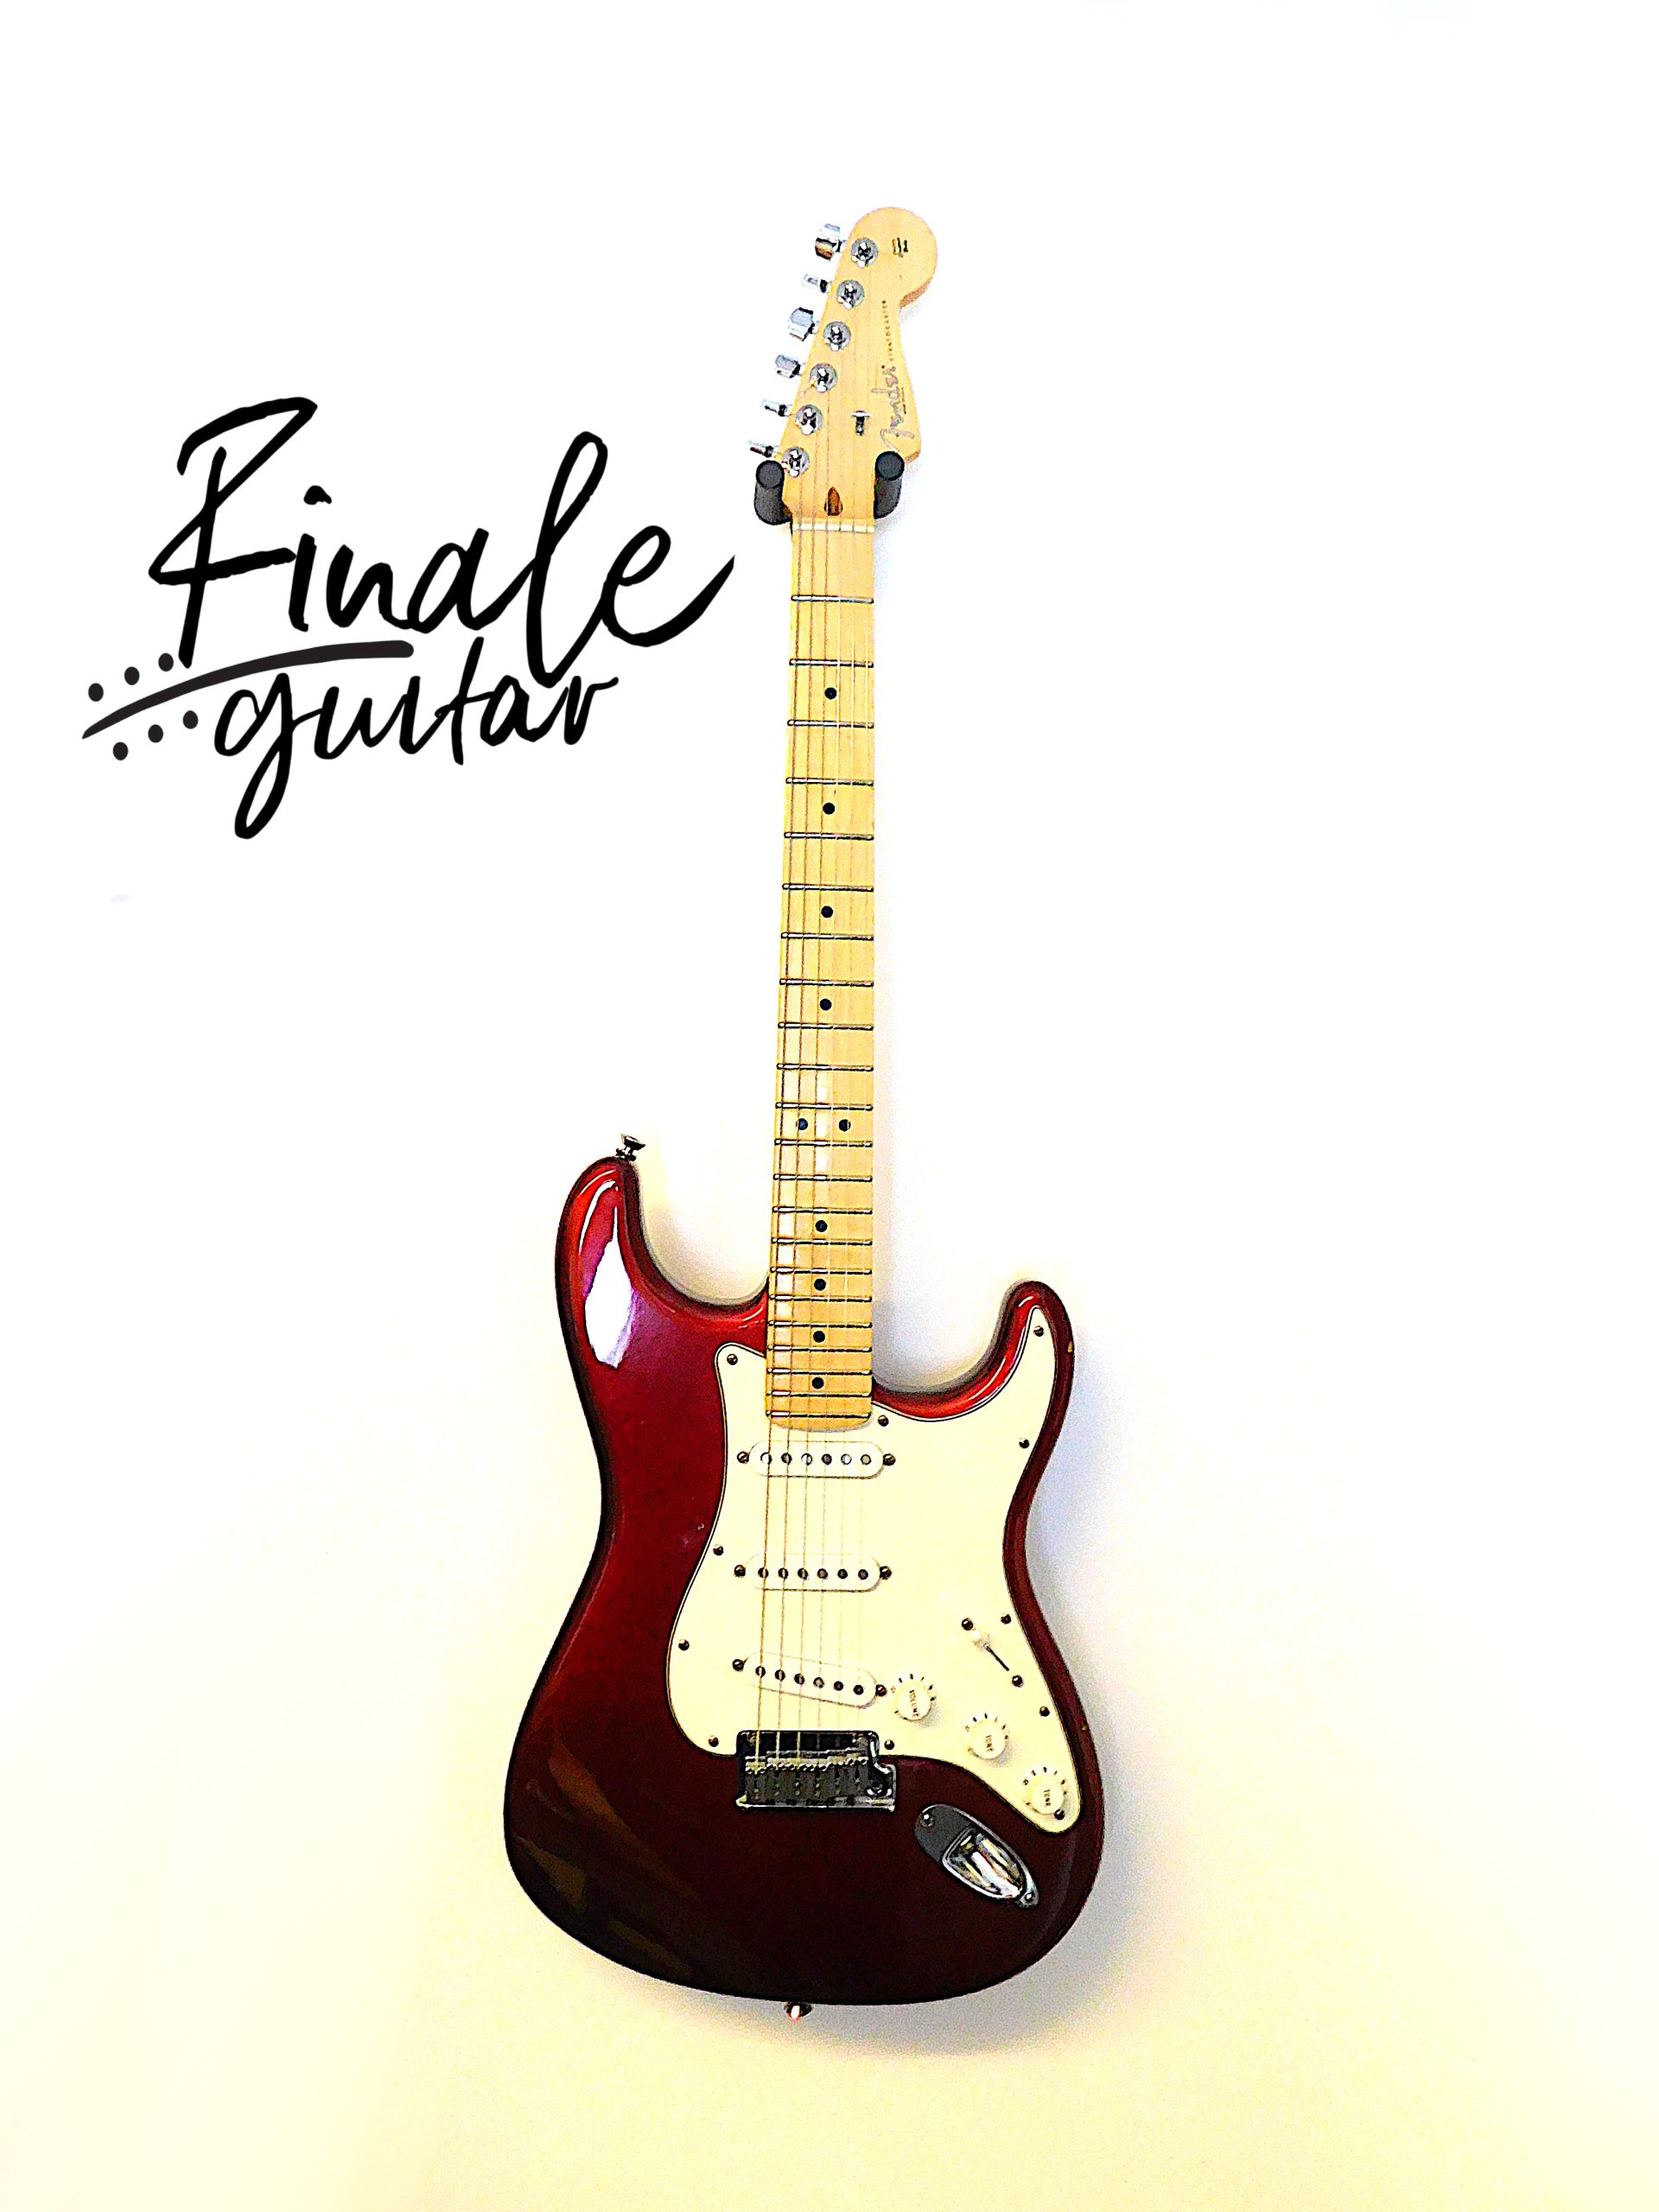 Fender American Stratocaster (2007) with fitted hard case, serial Z7042409 for sale in our Sheffield guitar shop, Finale Guitar